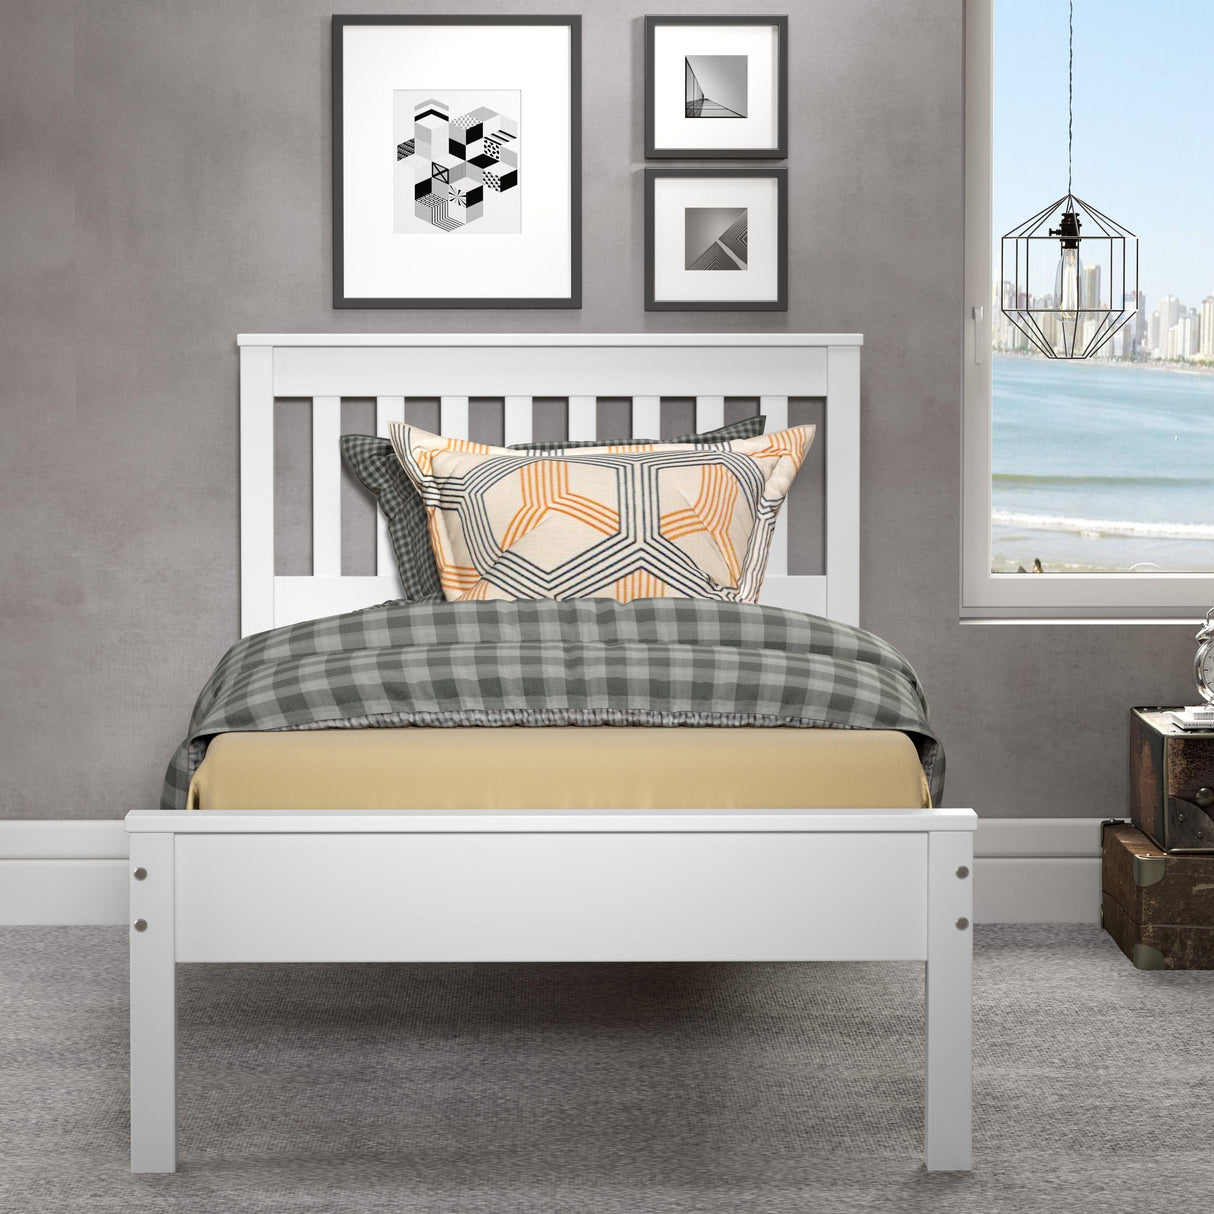 Donco Twin Contempo Bed White - Bedroom Depot USA